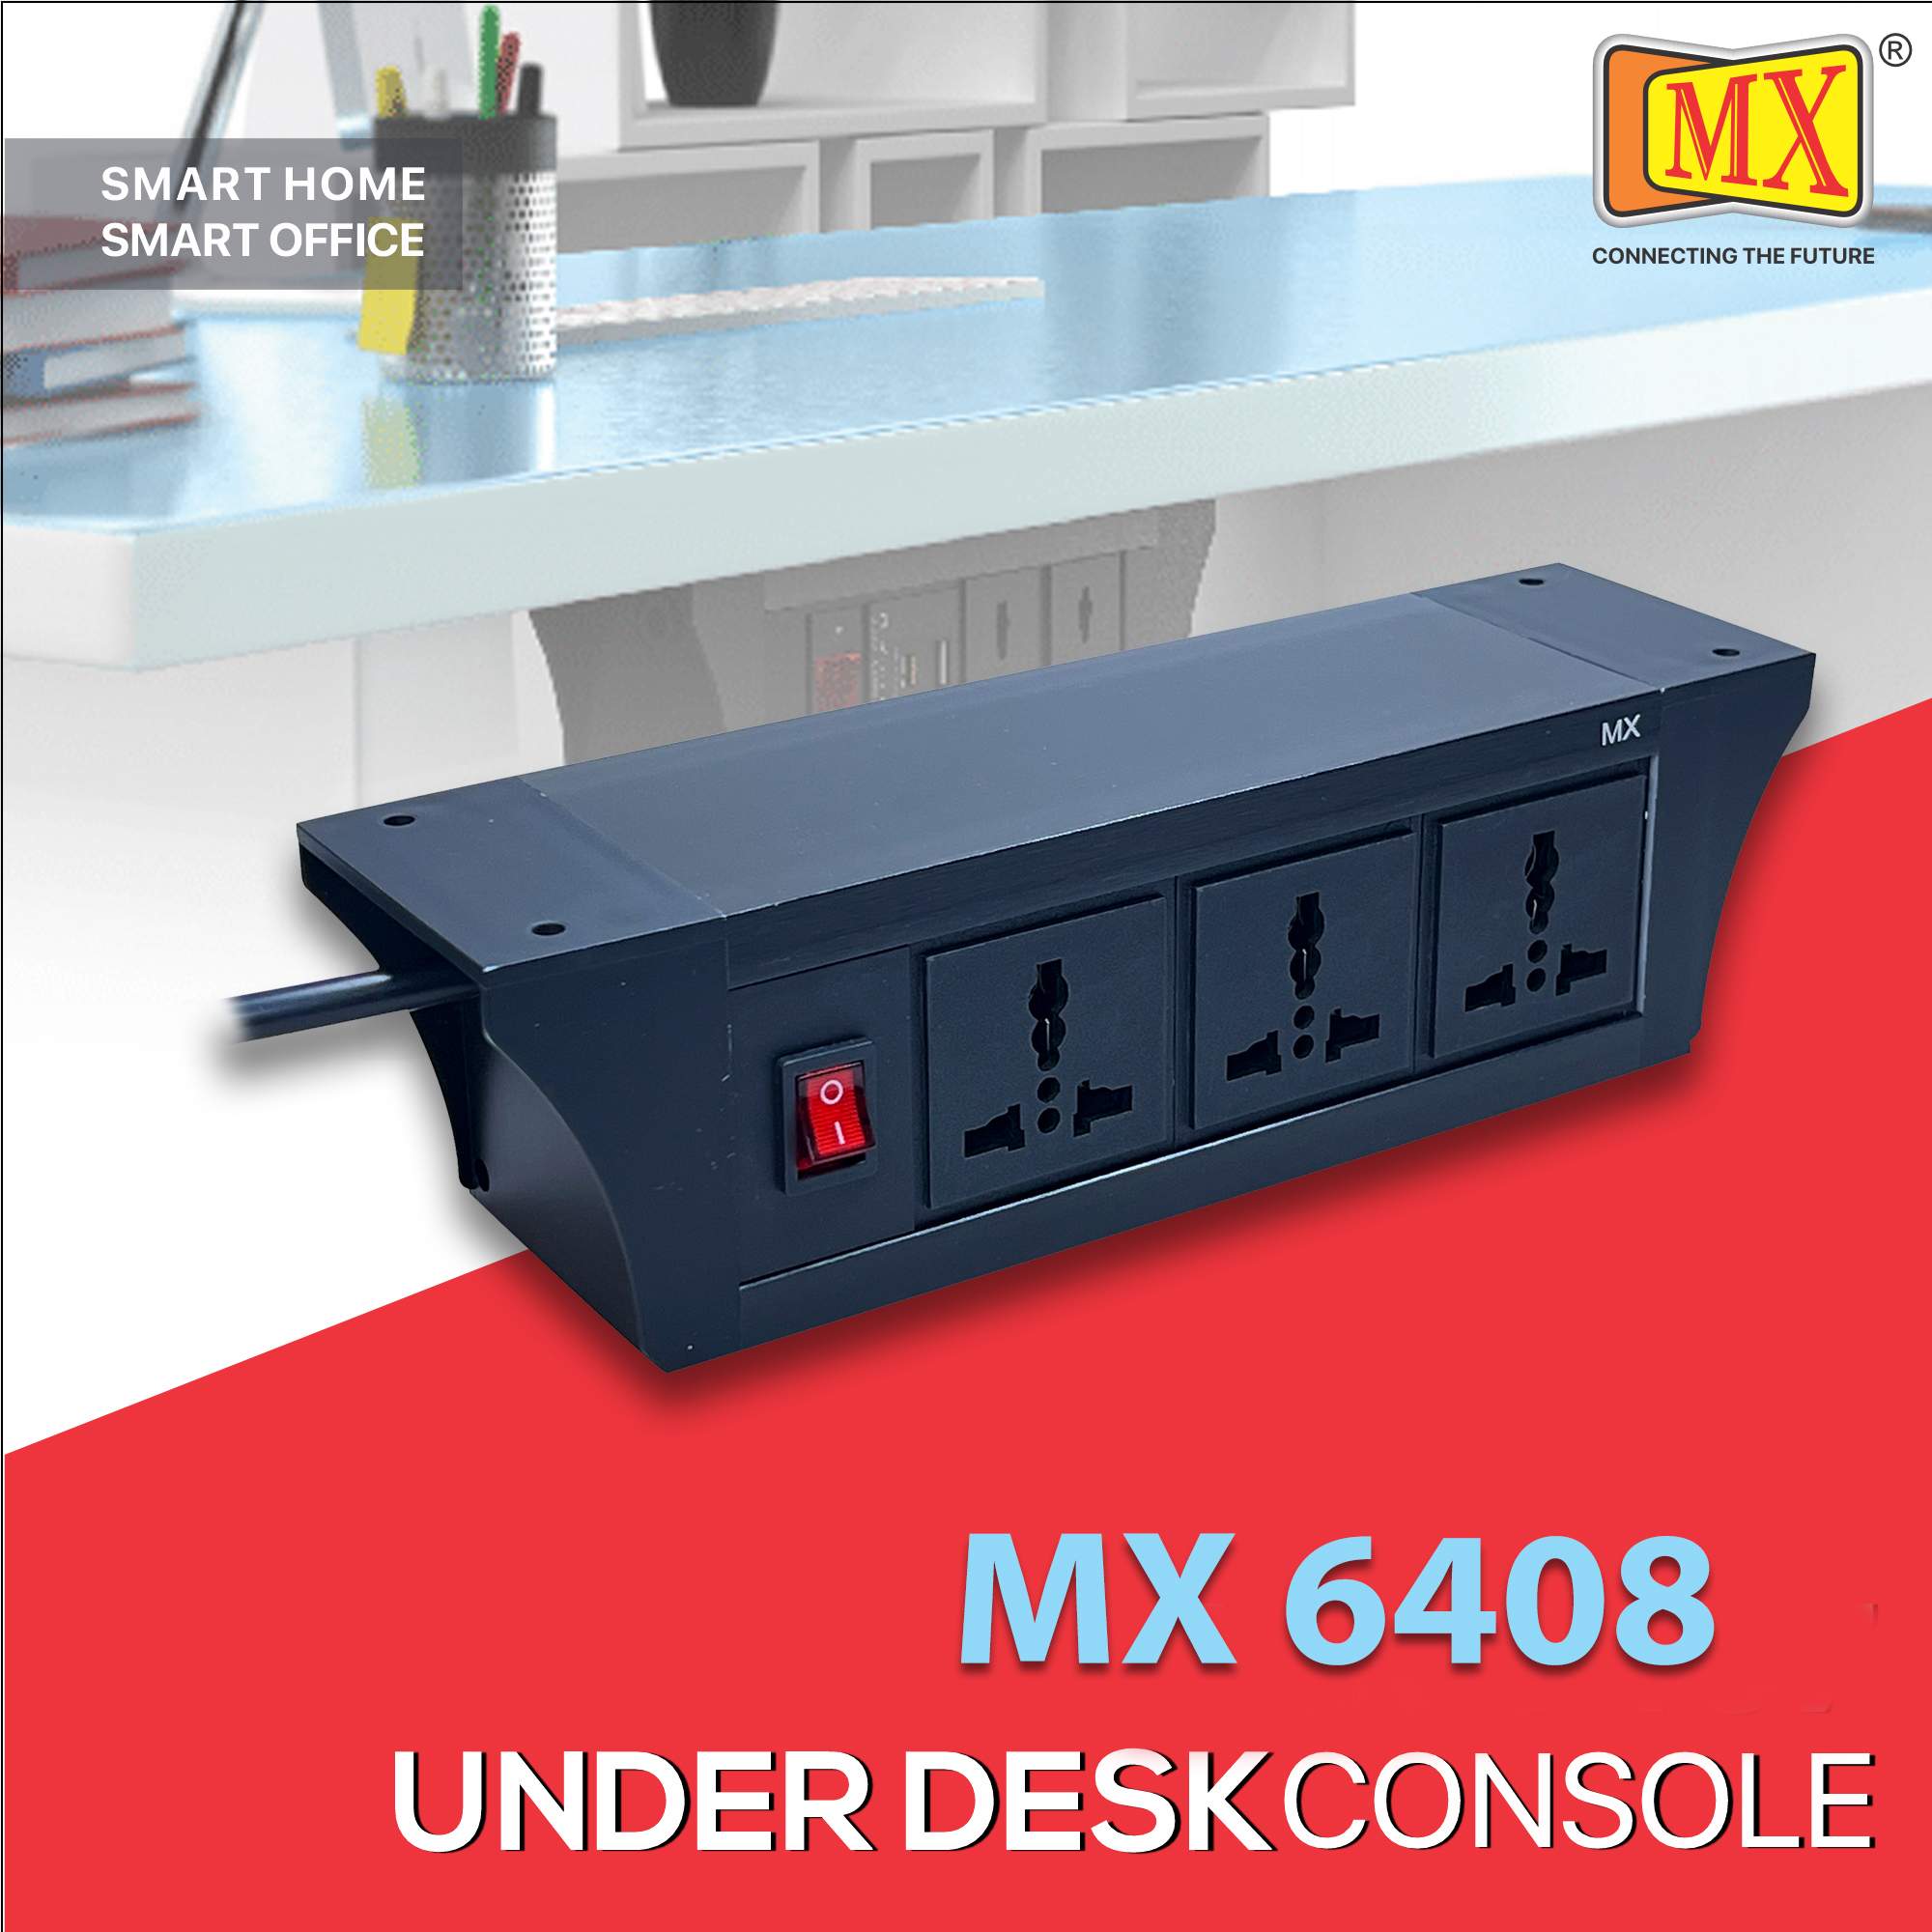 MX PDU Under table 6/13 Amps 3 Universal Socket | 2 USB (2.4 Amp) with Dual Pole LED Indicator Switch | 6 Amps Heavy Duty Cord 1.5 Meter with ISI Marked, Aluminium Body Material (MX-6408-1.5M Black)